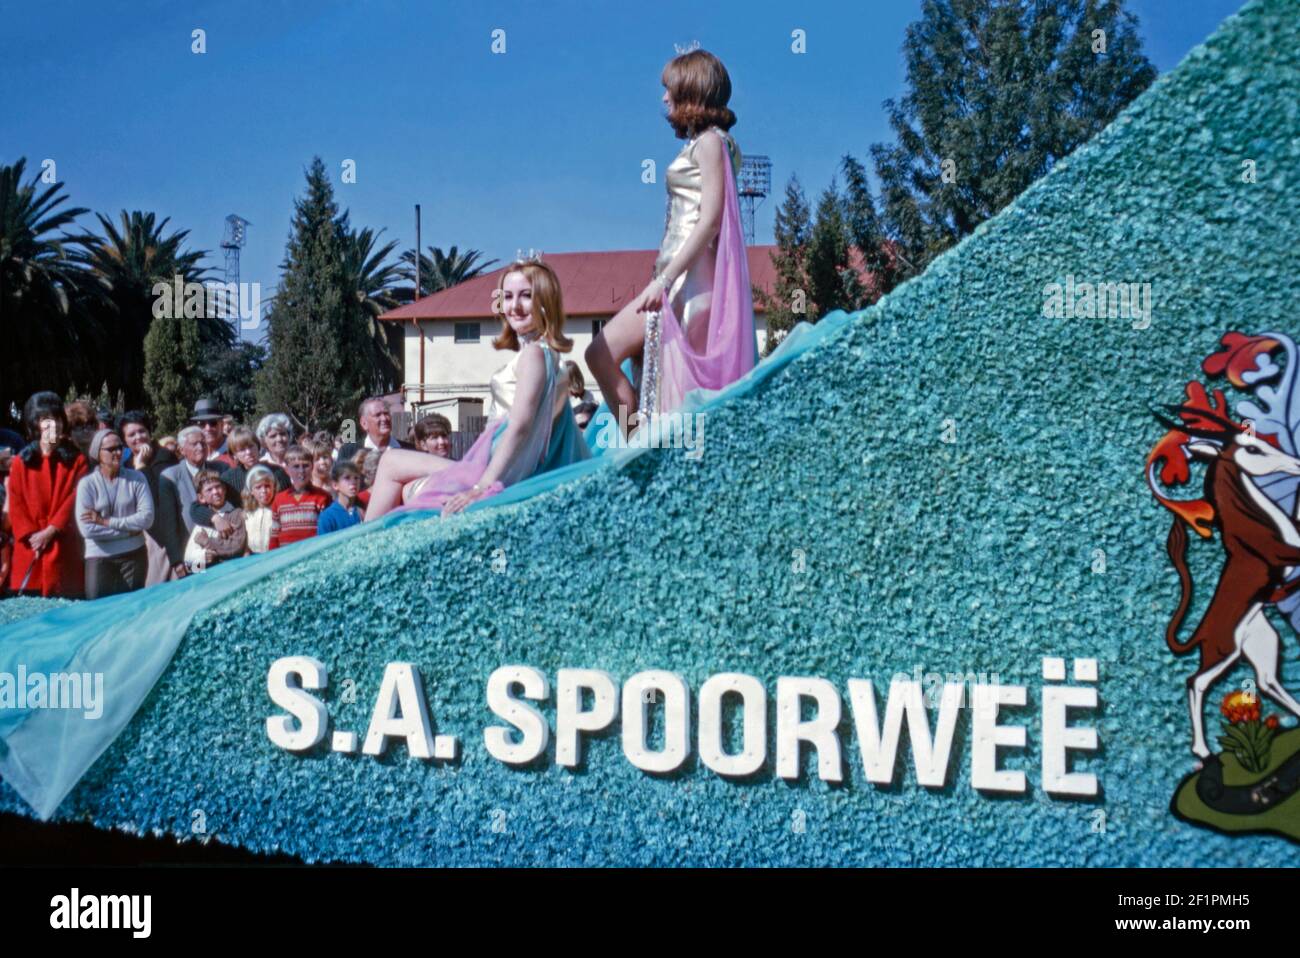 Parade float promoting South African Railways (Spoorweë in Afrikaans), during the apartheid era, Durban, South Africa, 1966. There are two beauty queens wearing crowns on the float. It’s very much a white audience viewing this event. This image is from an old amateur 35mm Kodak colour transparency. Stock Photo